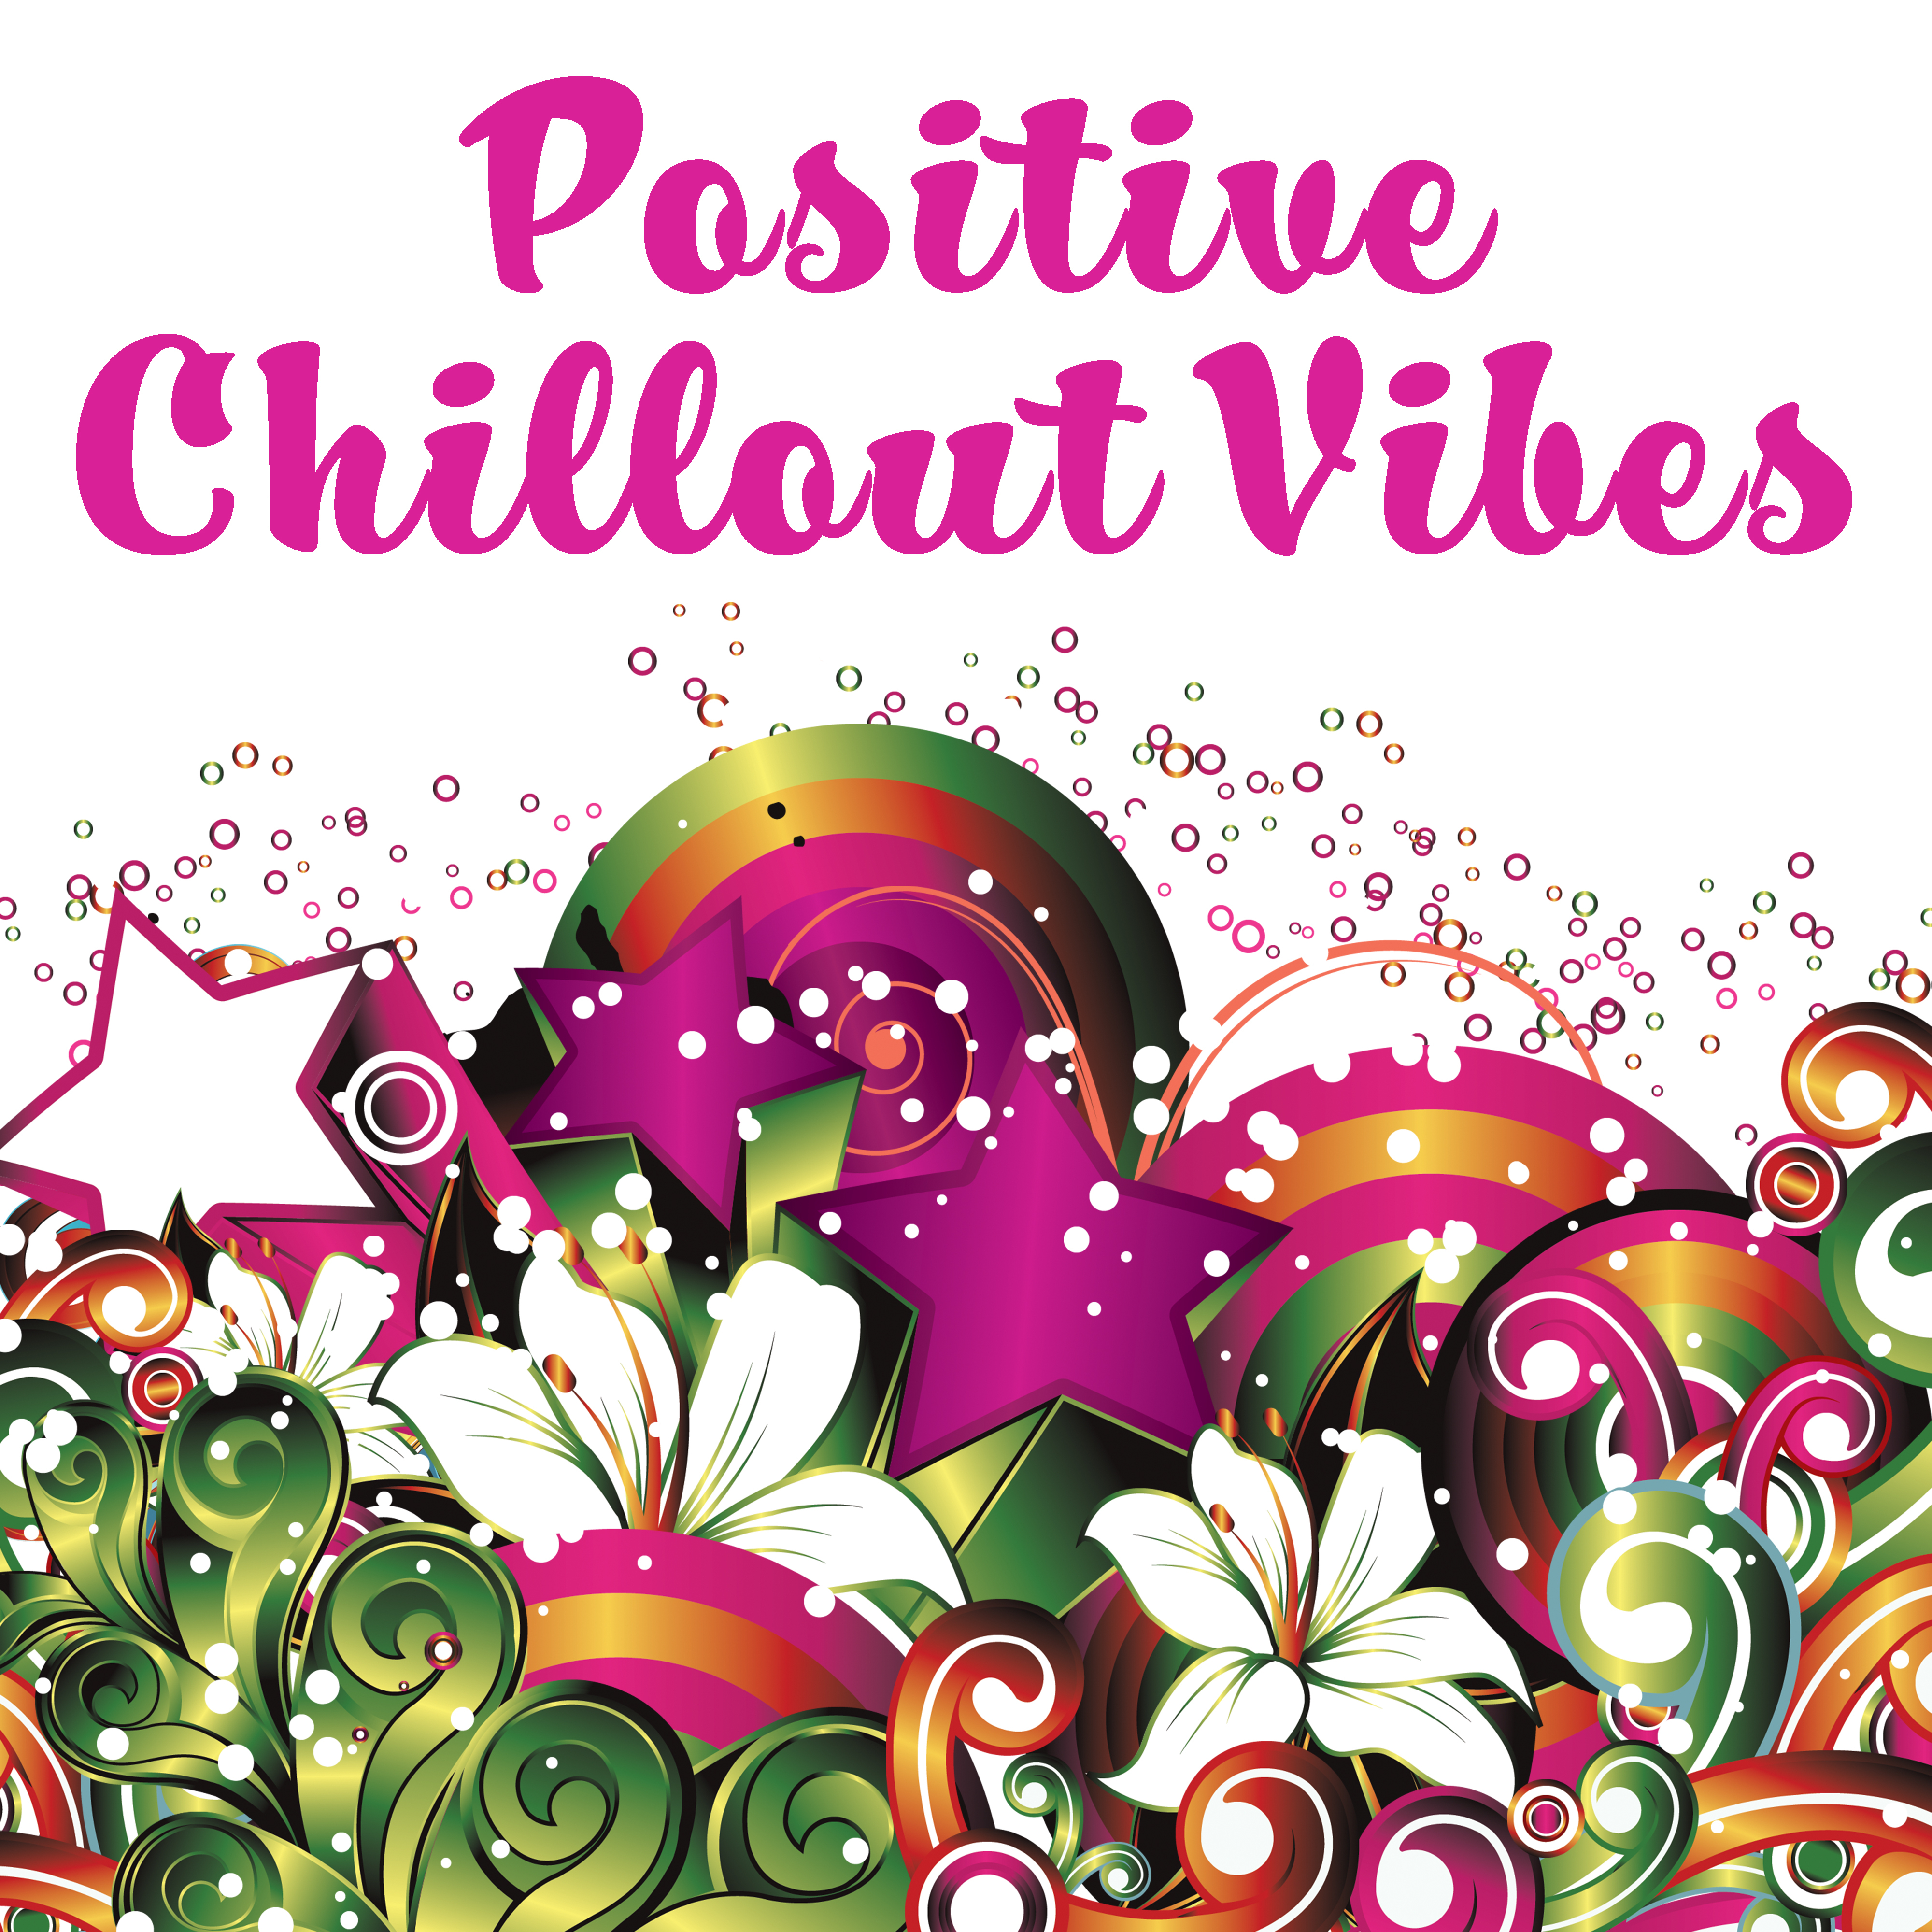 Positive Chillout Vibes – Relaxing Music, Chill Out Sounds, Electronic Music, Ambient